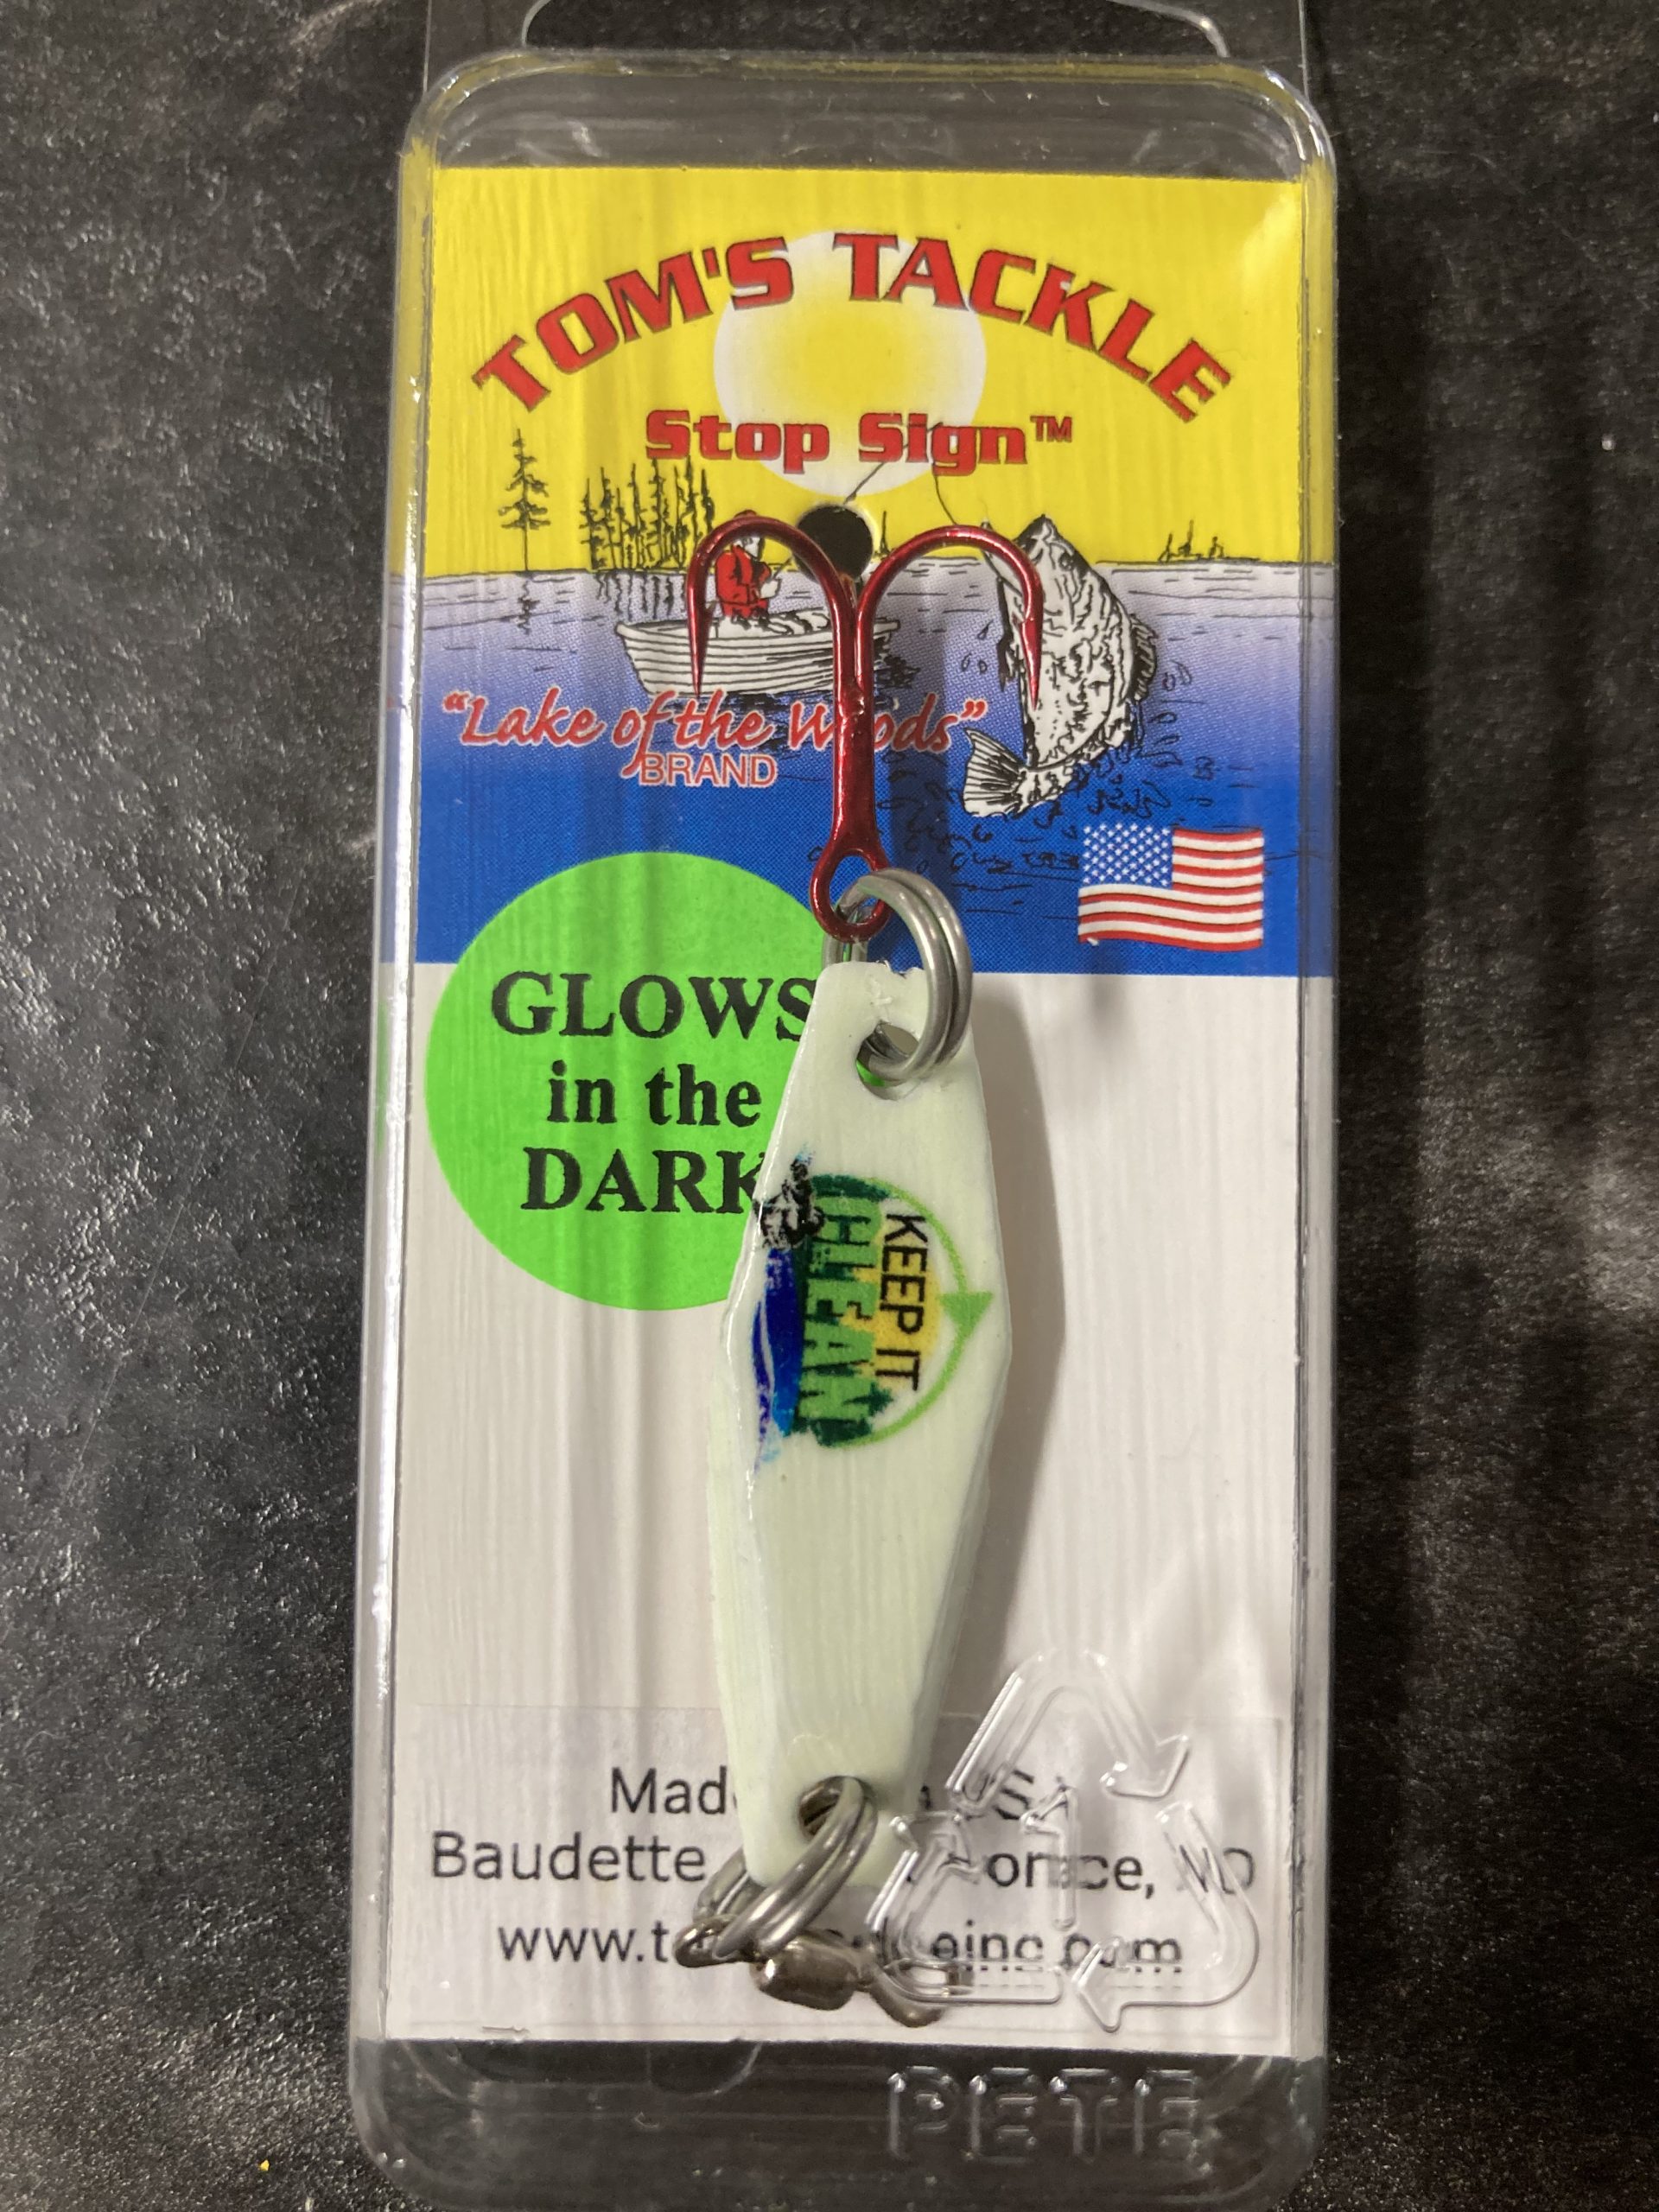 Tom's Tackle in Baudette, MN geared towards Lake of the Woods